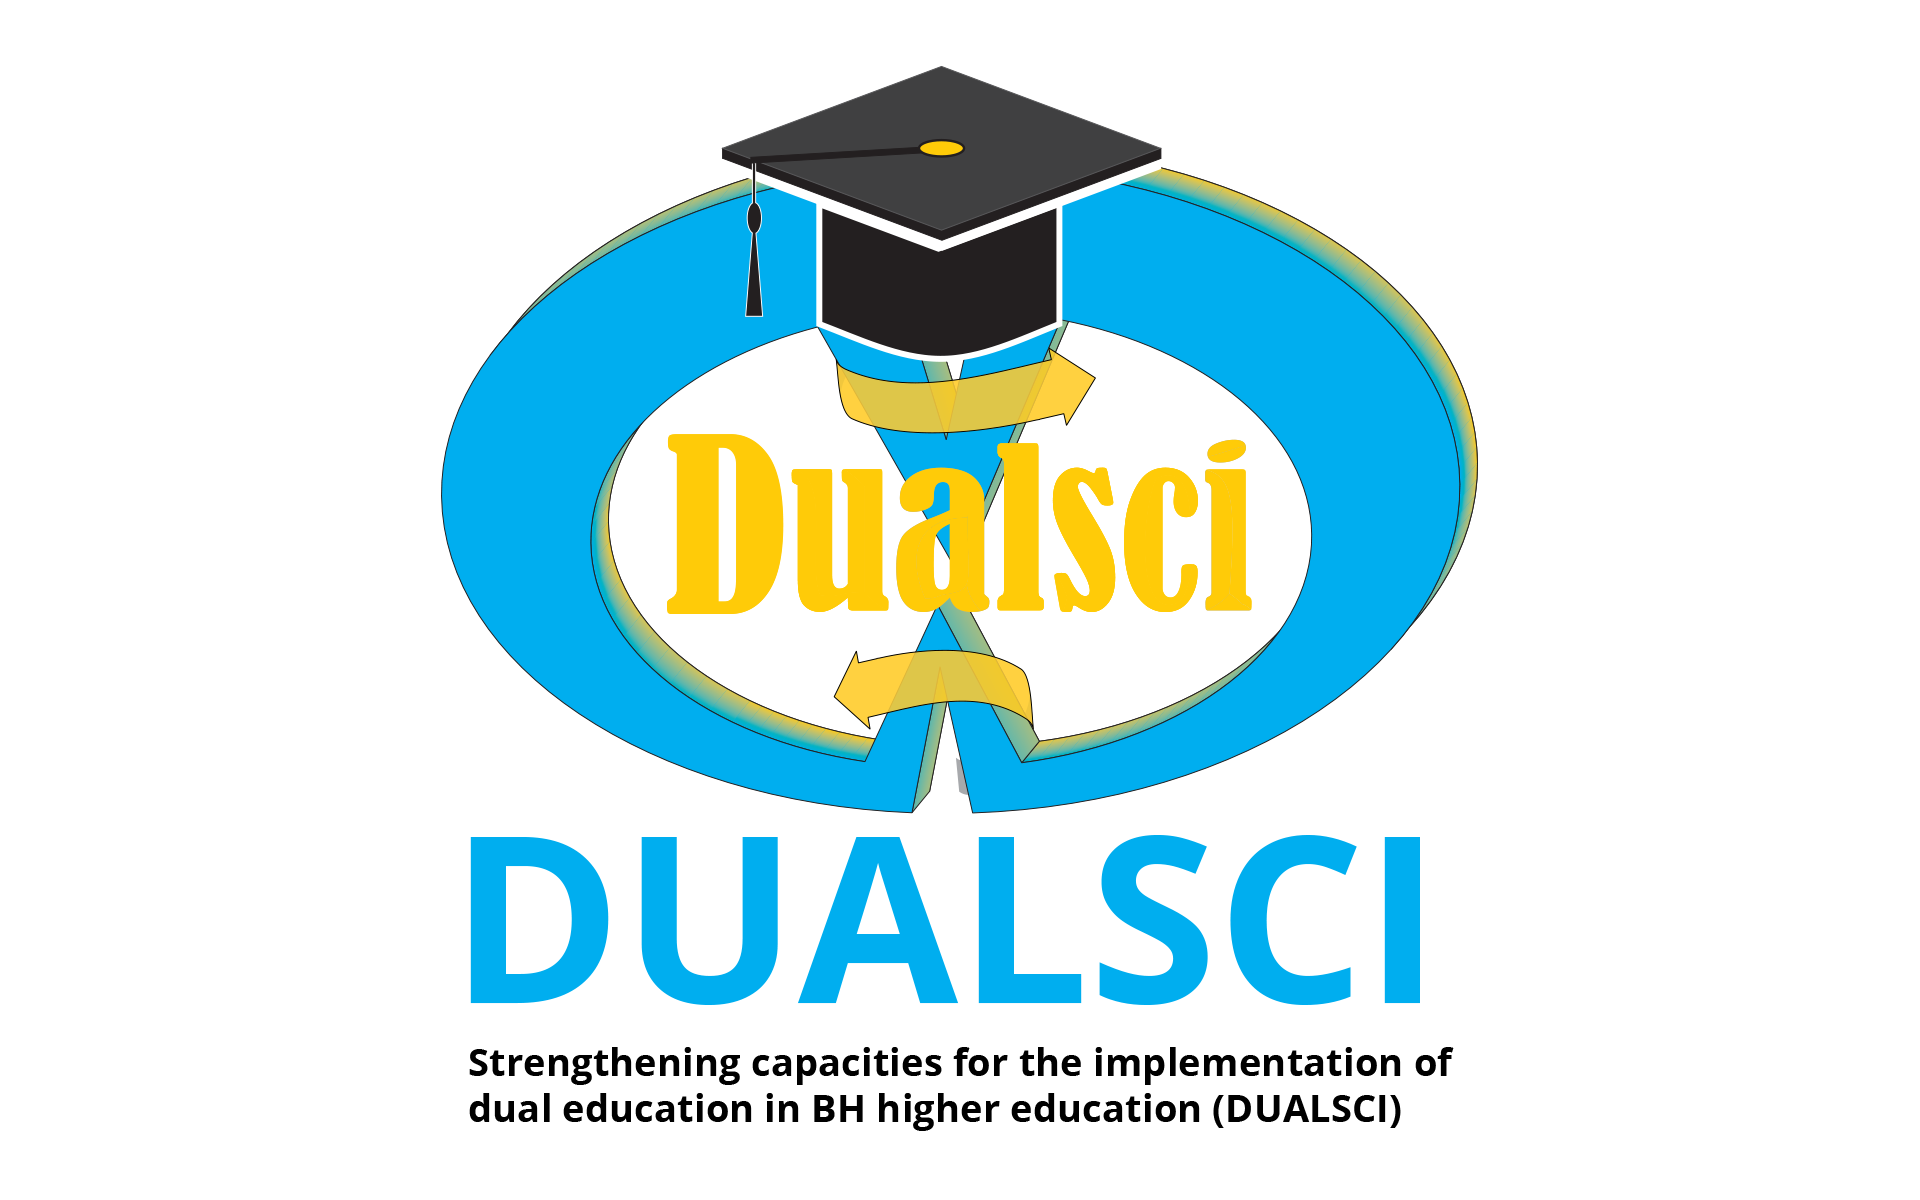 Capacity Building For The Implementation Of Dual Education In BH Higher Education (DUALSCI) Project Presentation